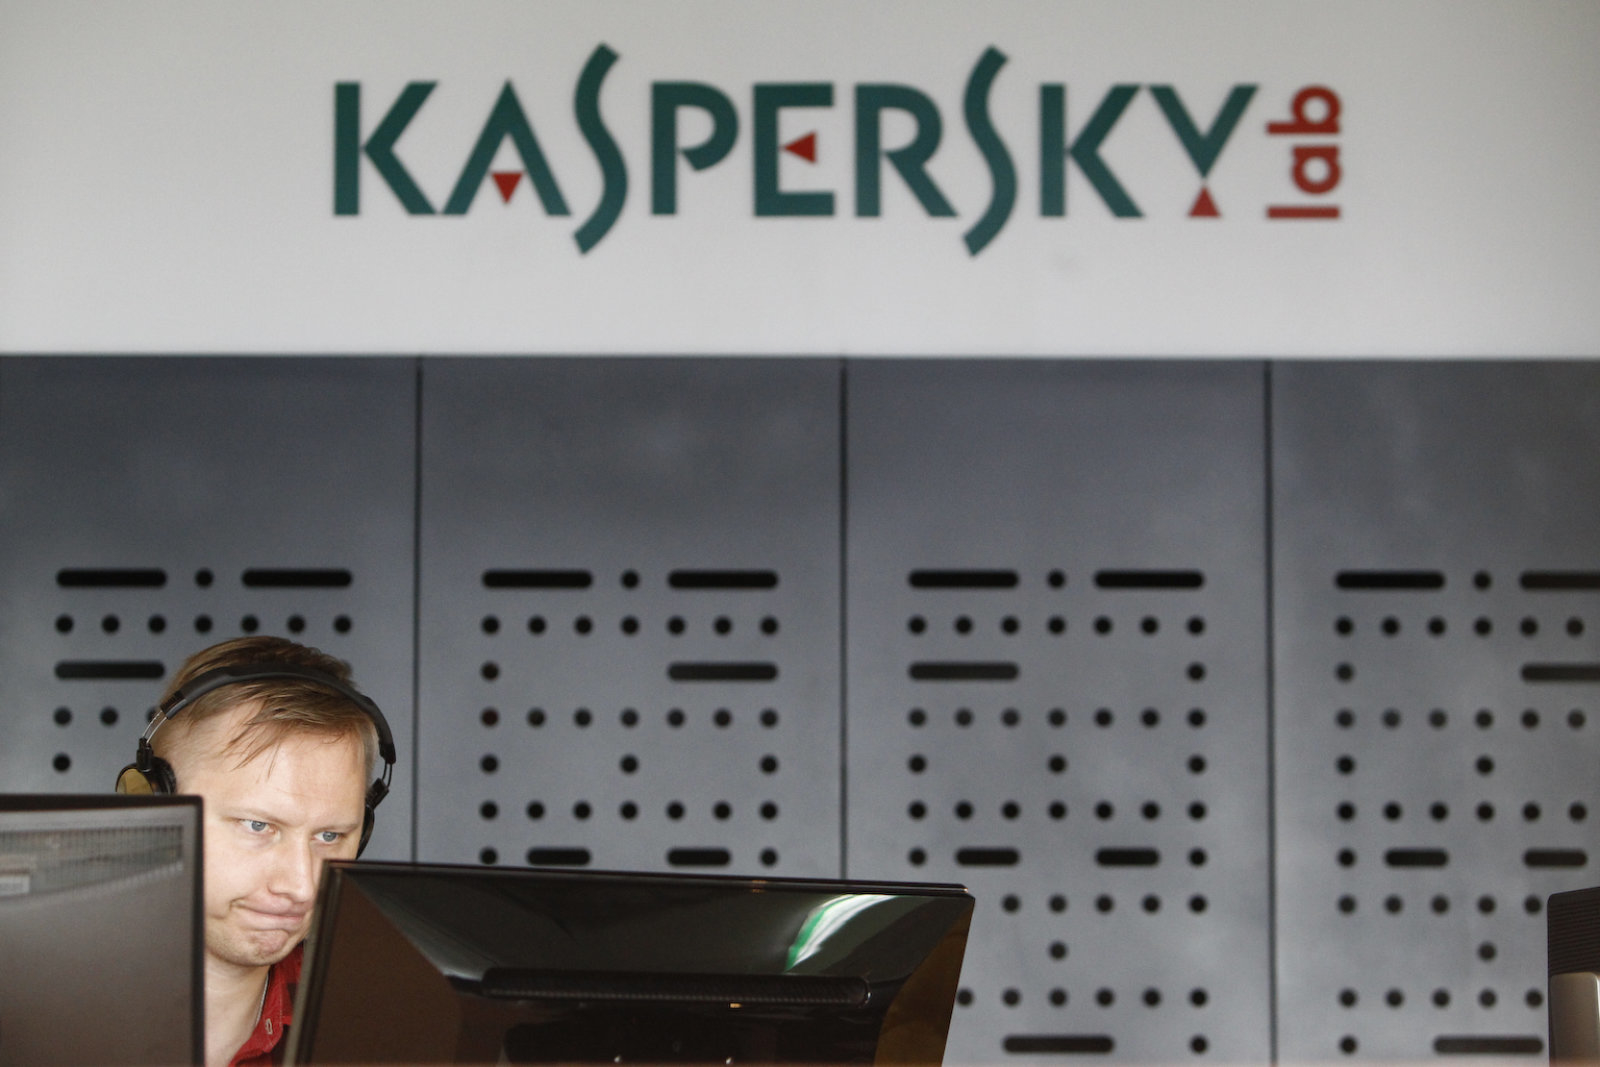 An employee works near screens in the virus lab at the headquarters of Russian cyber security company Kaspersky Labs in Moscow July 29, 2013. If you want to hack a phone, order a cyber attack on a competitor's website or buy a Trojan programme to steal banking information, look no further than the former Soviet Union. Picture taken July 29, 2013. To match Feature RUSSIA-CYBERCRIME/  REUTERS/Sergei Karpukhin (RUSSIA - Tags: SCIENCE TECHNOLOGY CRIME LAW BUSINESS)